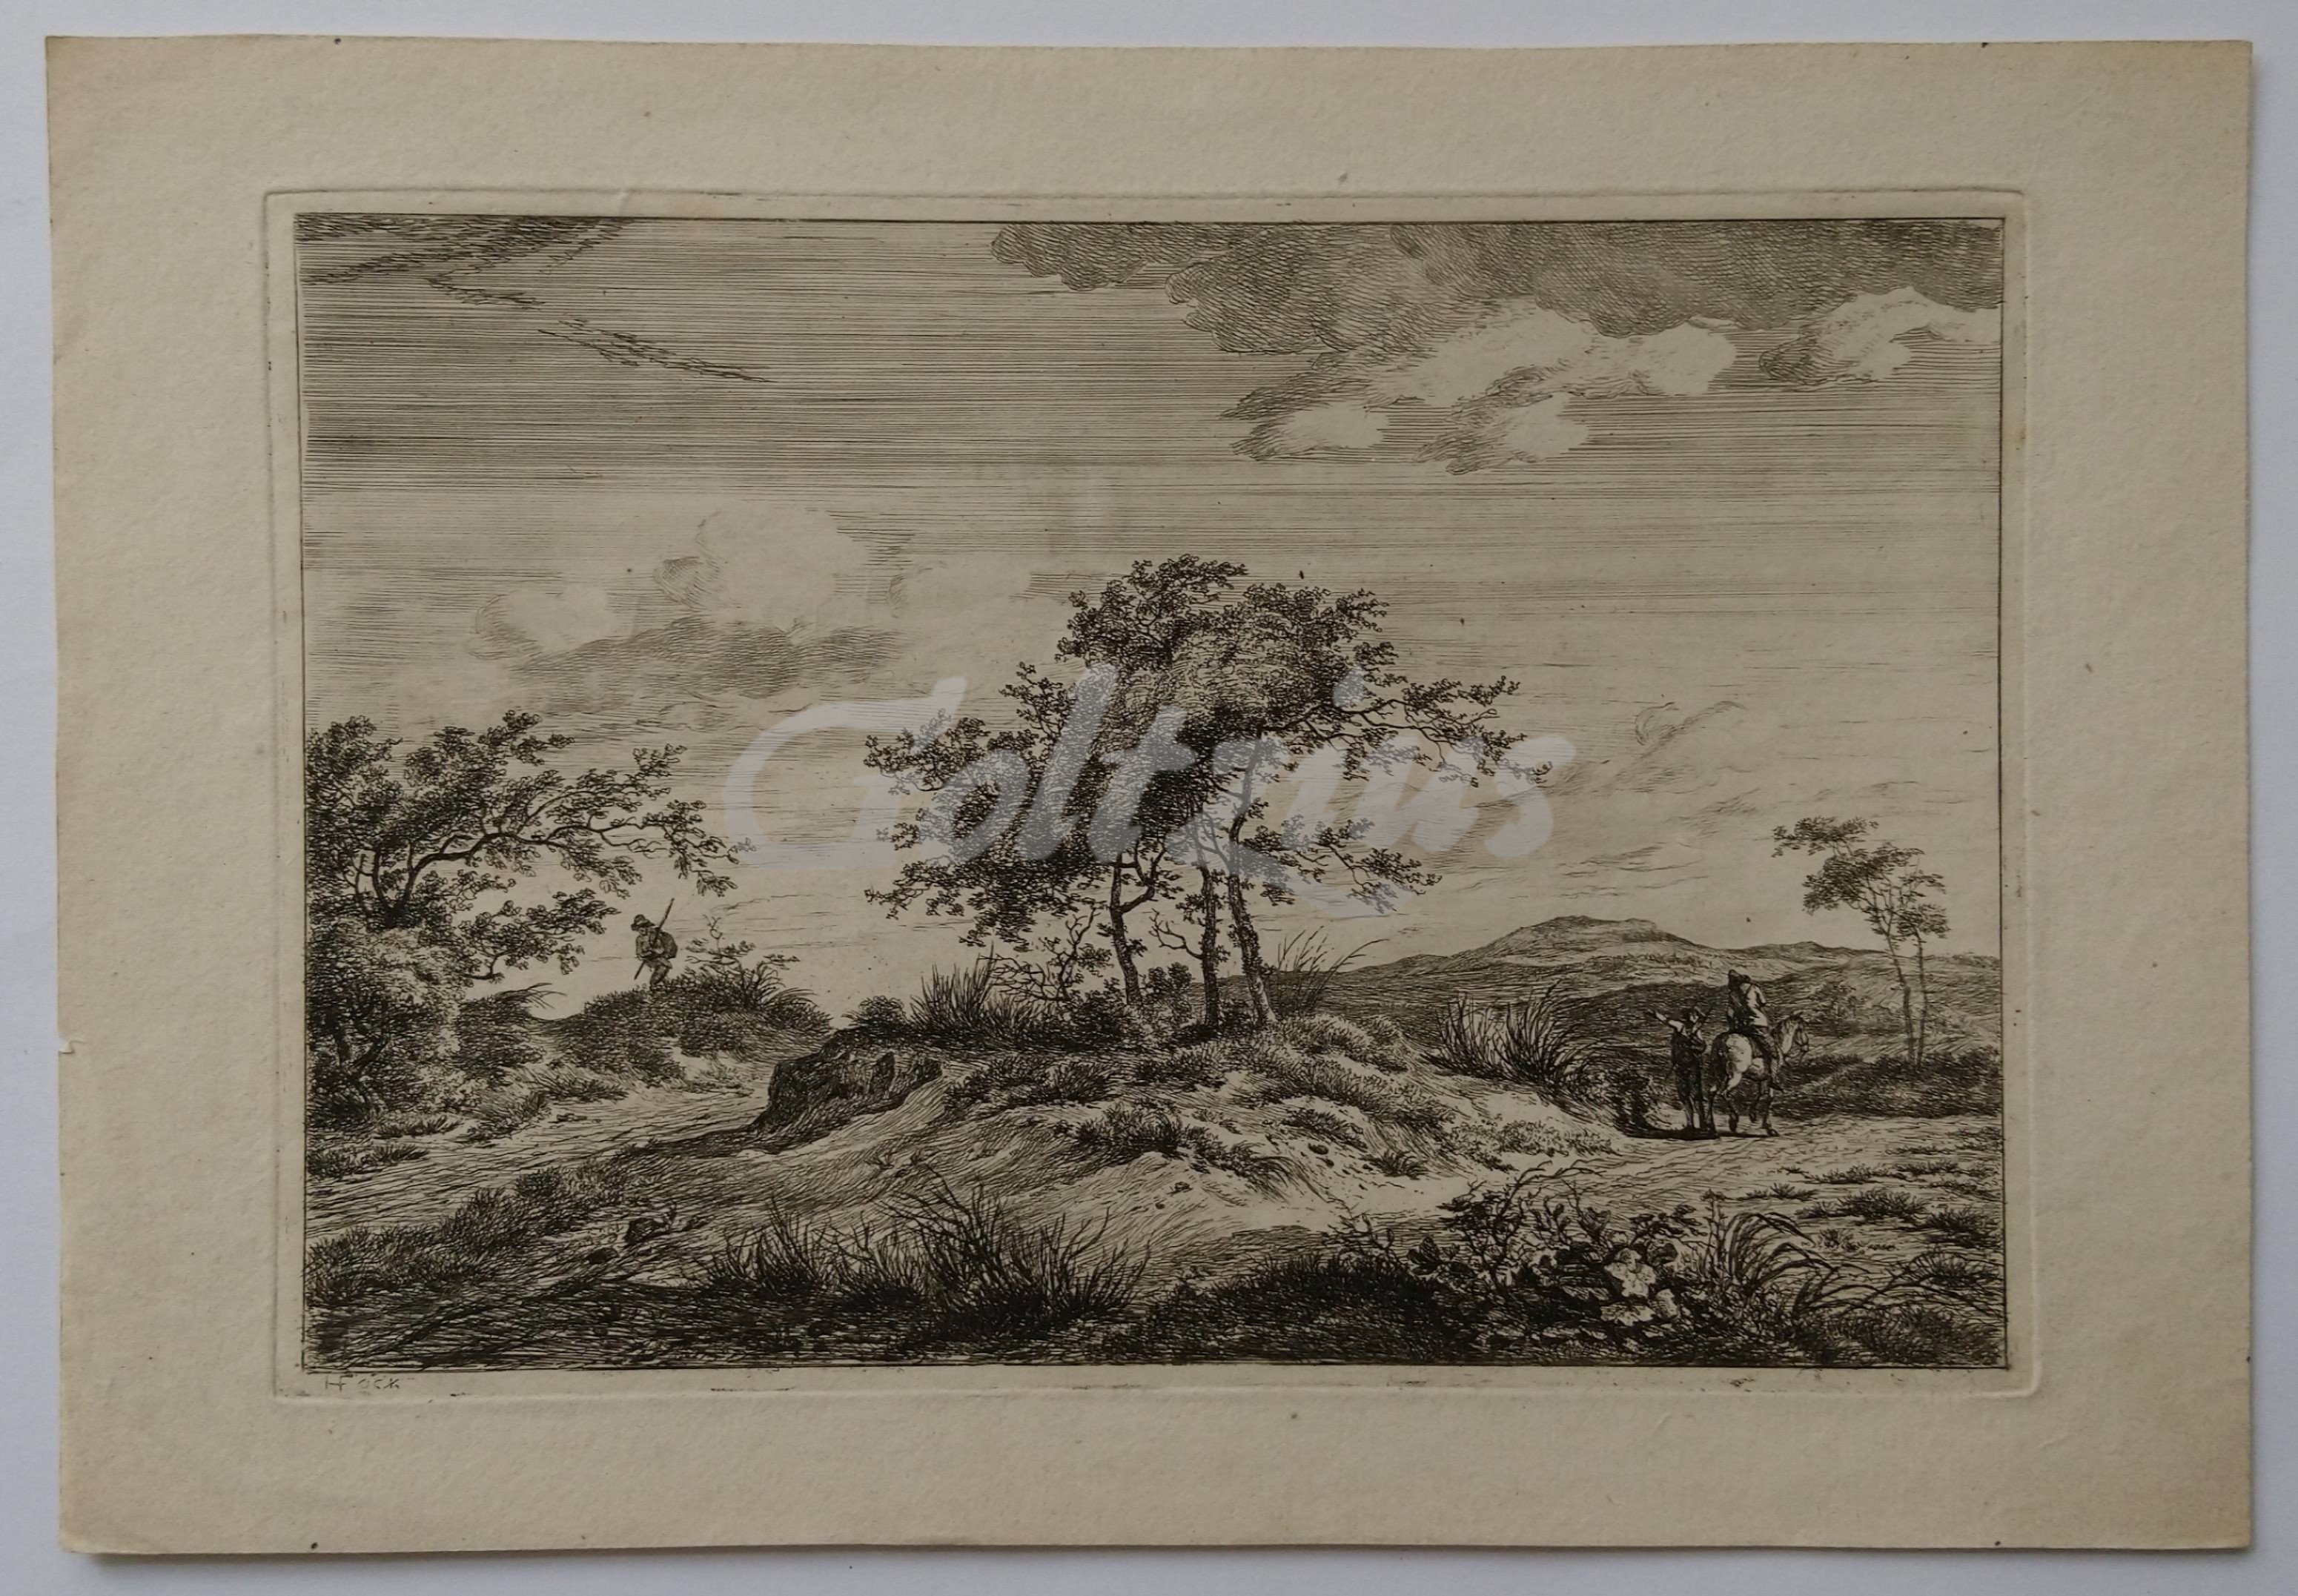 FOCK, HERMANUS (1766-1822), Landscape with rider asking the way